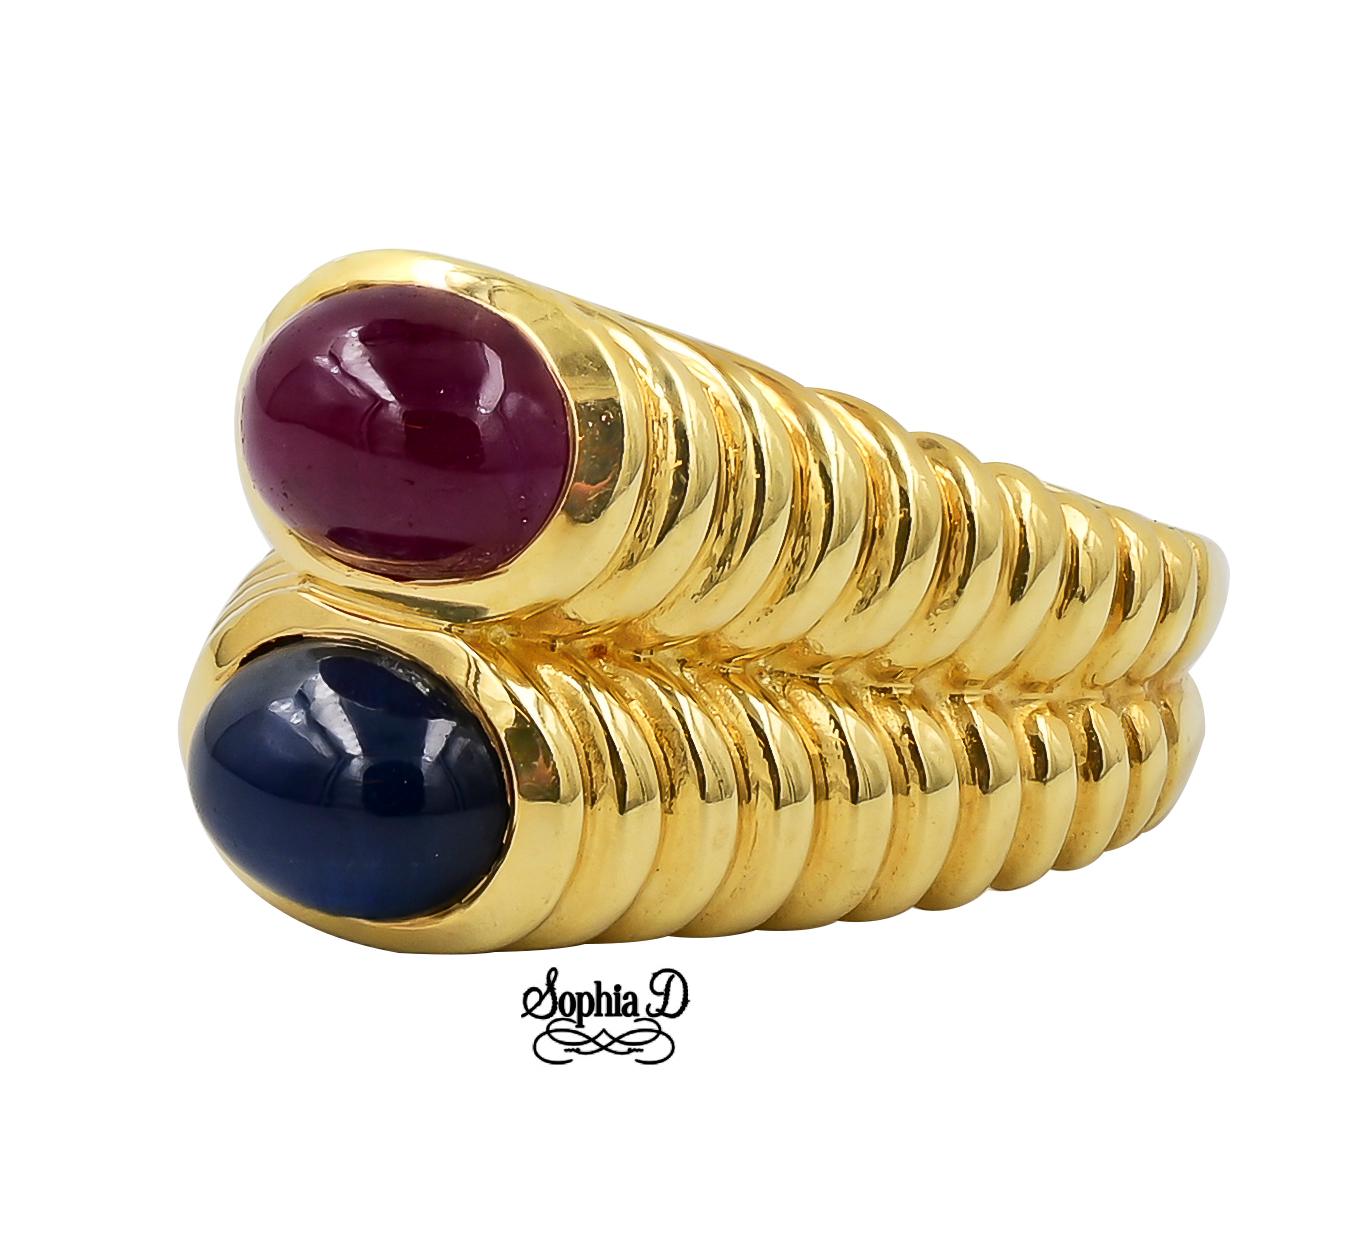 18K yellow gold ring with blue sapphire and ruby.

Sophia D by Joseph Dardashti LTD has been known worldwide for 35 years and are inspired by classic Art Deco design that merges with modern manufacturing techniques.  